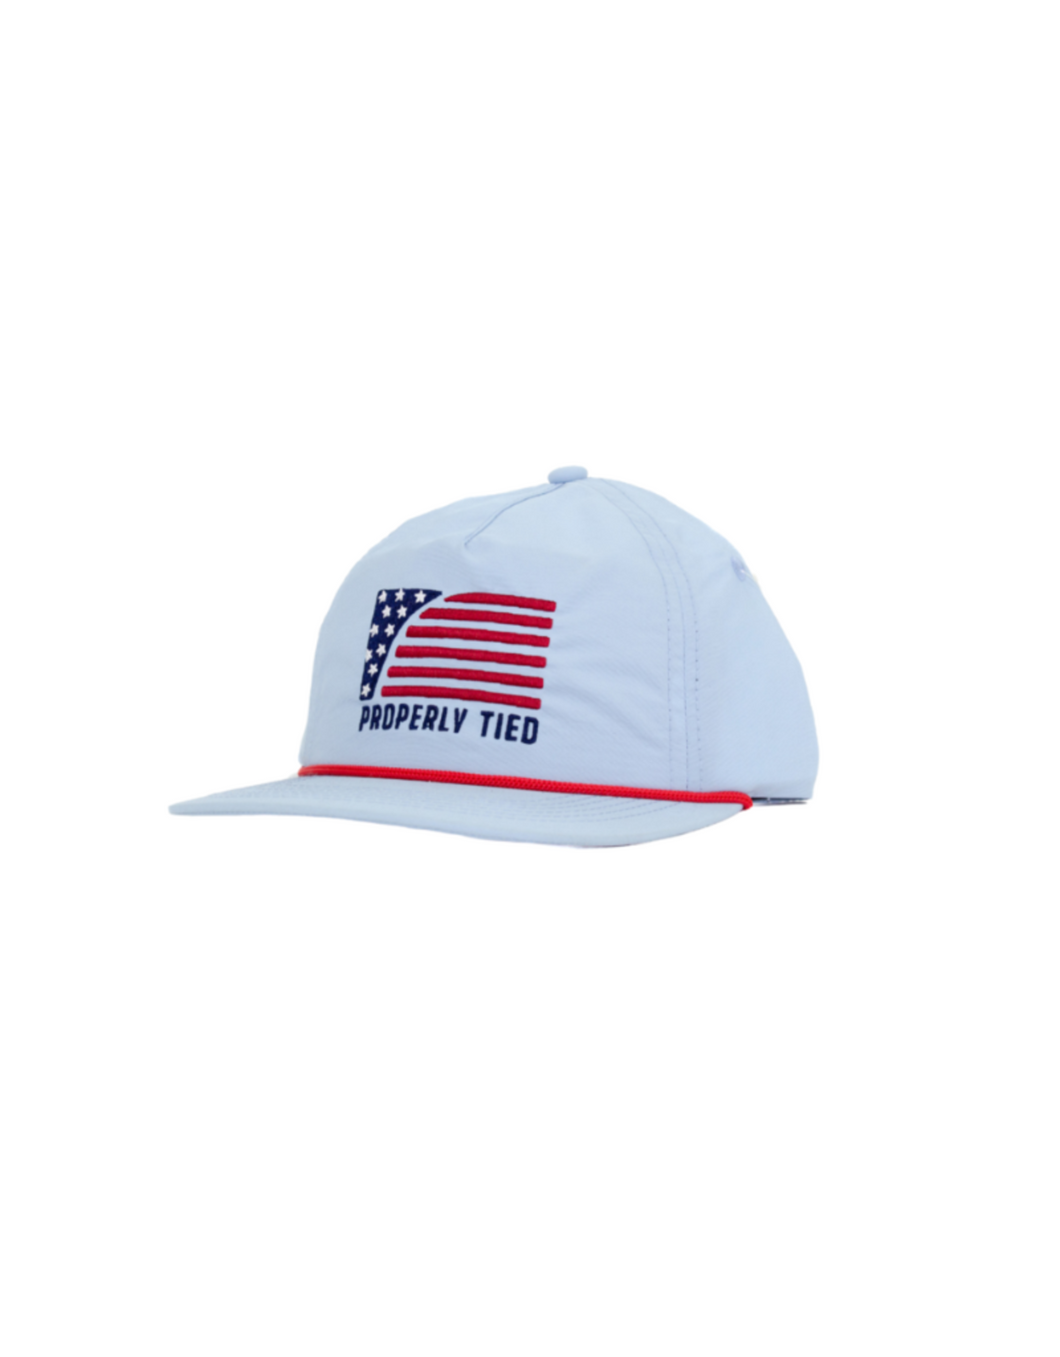 Properly Tied: Sports Flag Hat